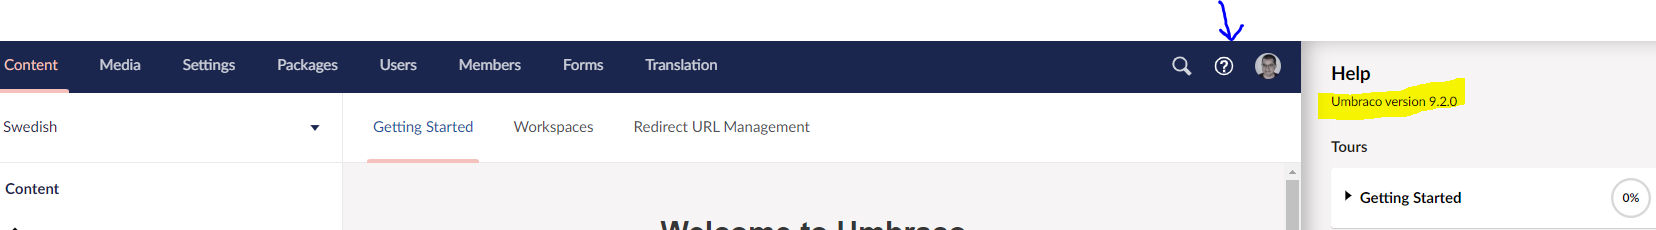 After logging to Umbraco. Find icon ? in the top menu. Click on ? icon to see version number